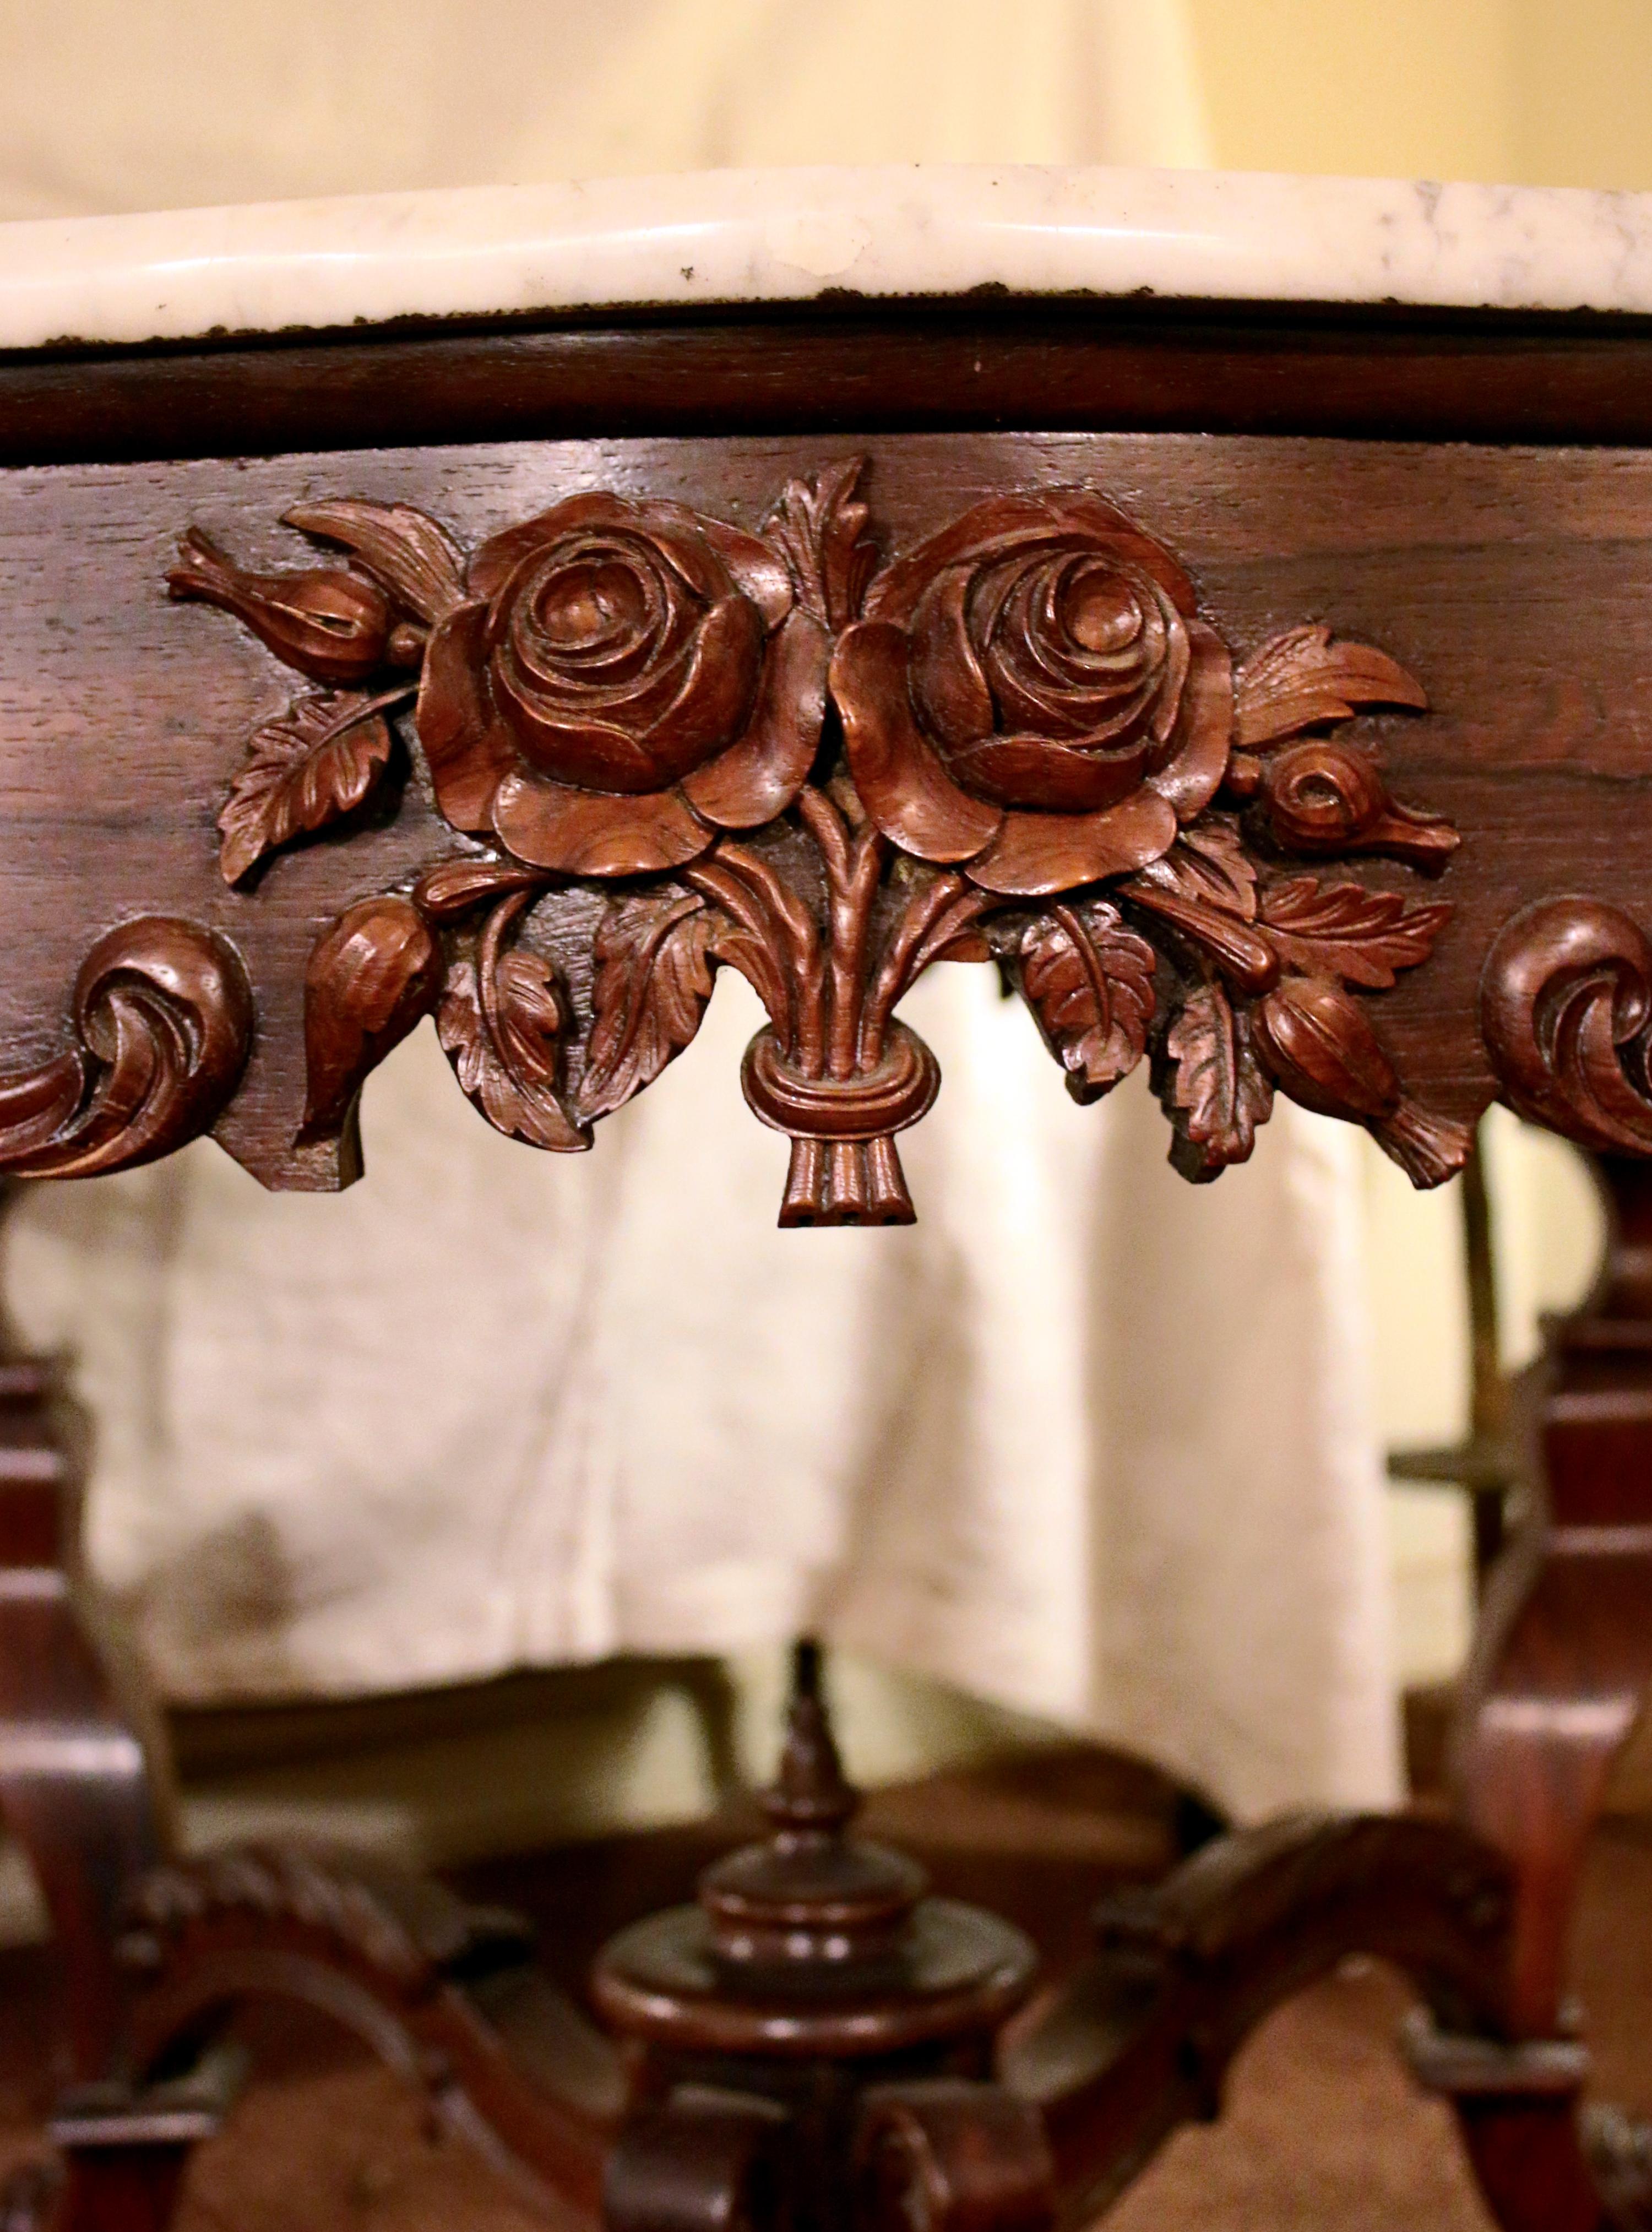 Rococo Revival 19th Century Rosewood Center Table Attributed to Joseph Meeks For Sale